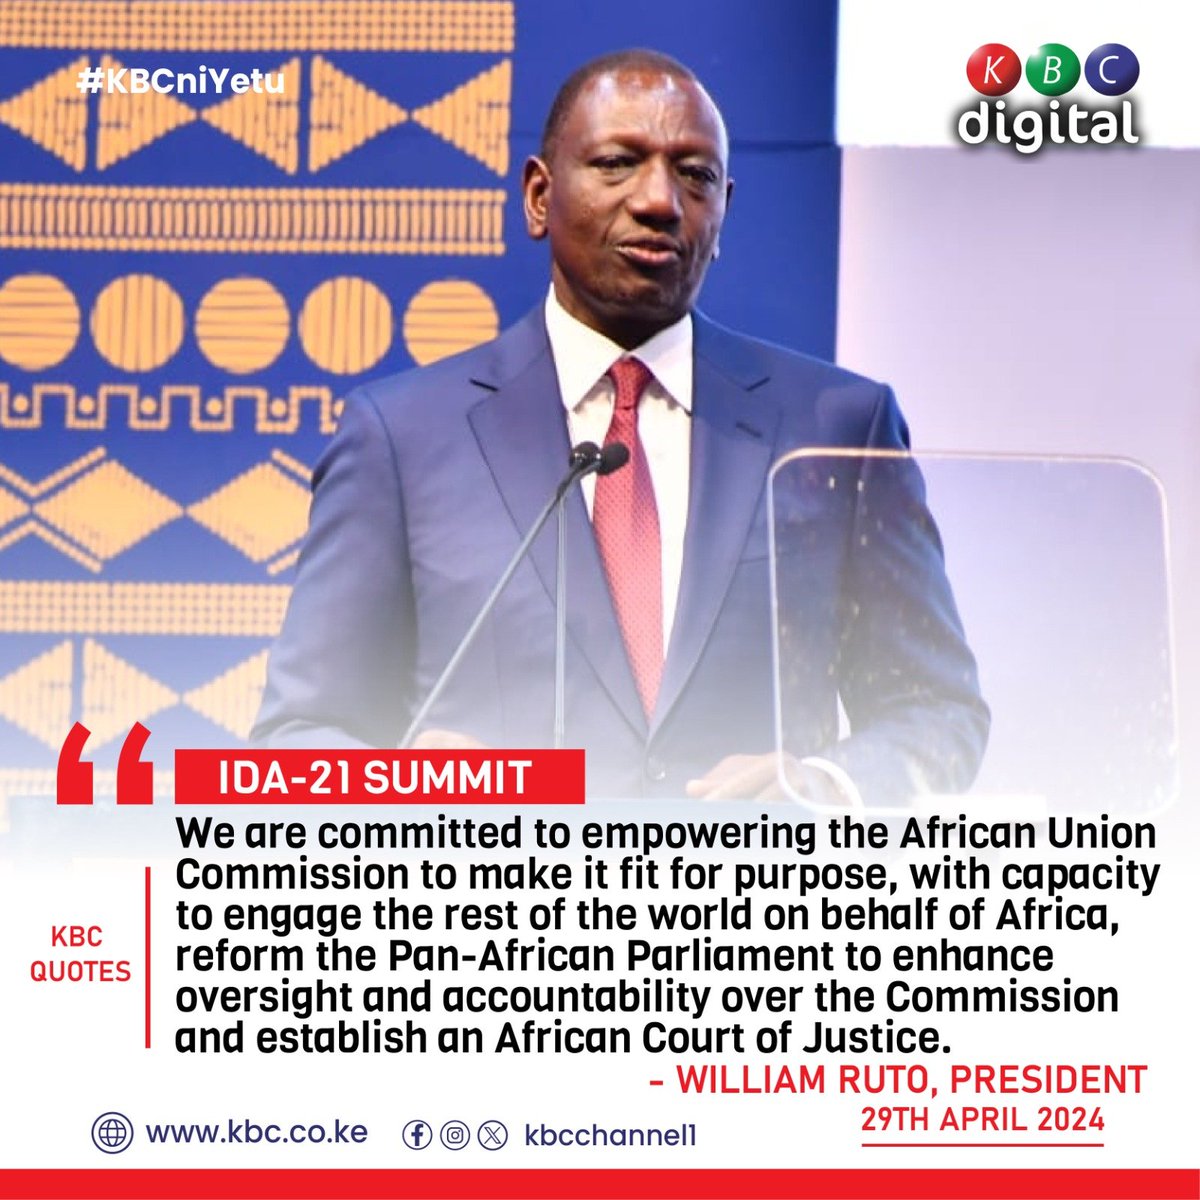 'We call on our partners to respond effectively by increasing their IDA contribution from the US$93 billion raised in 2021 to at least US$120 billion in 2024.' -William Ruto, President #idaworks #ida21nairobi #kenya